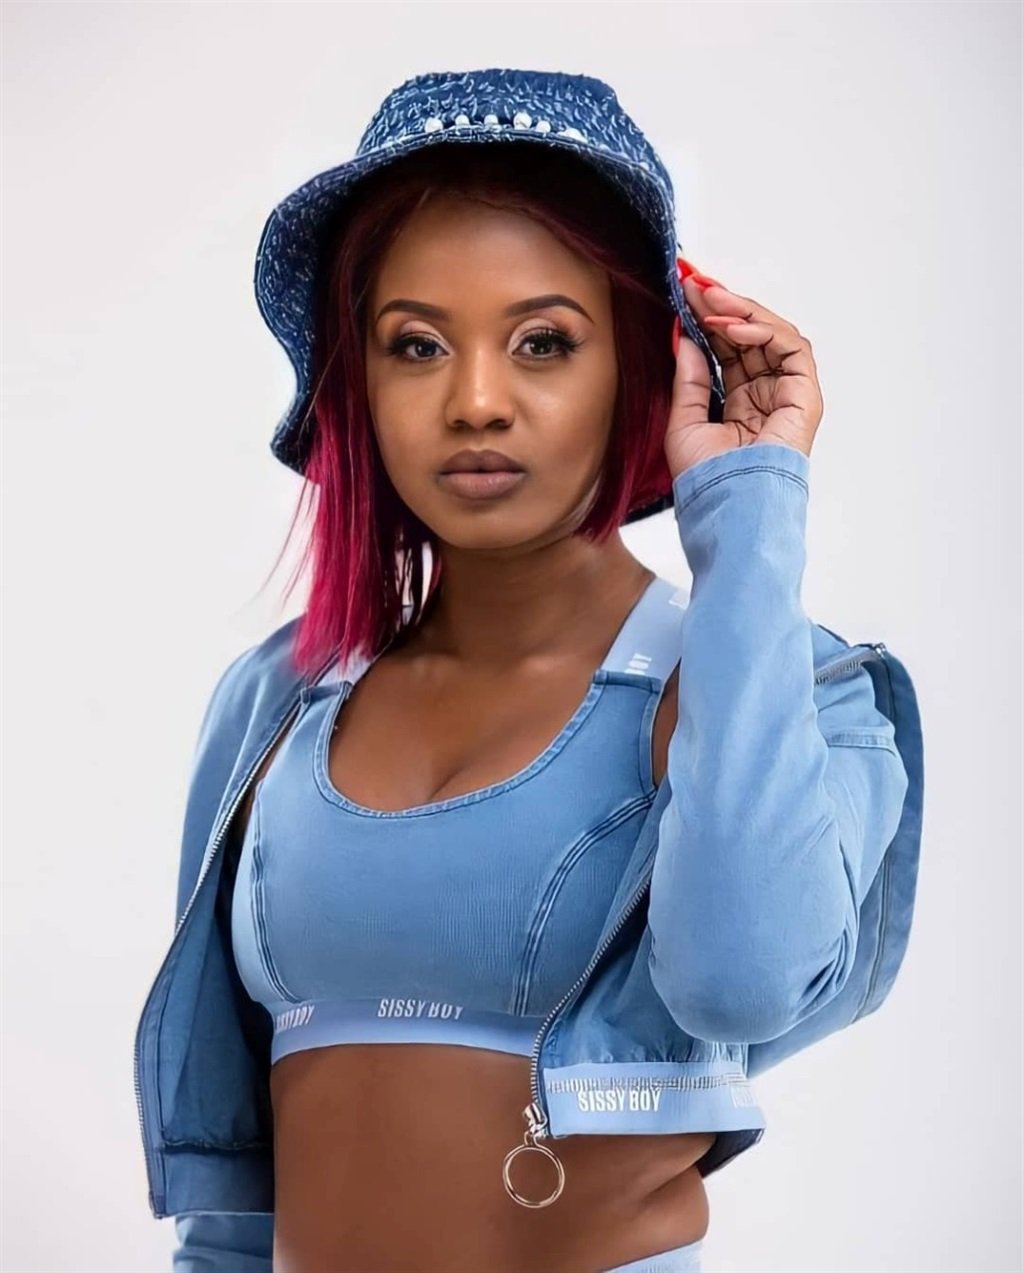 Babes Wodumo is hurt by the comments on her weight loss.